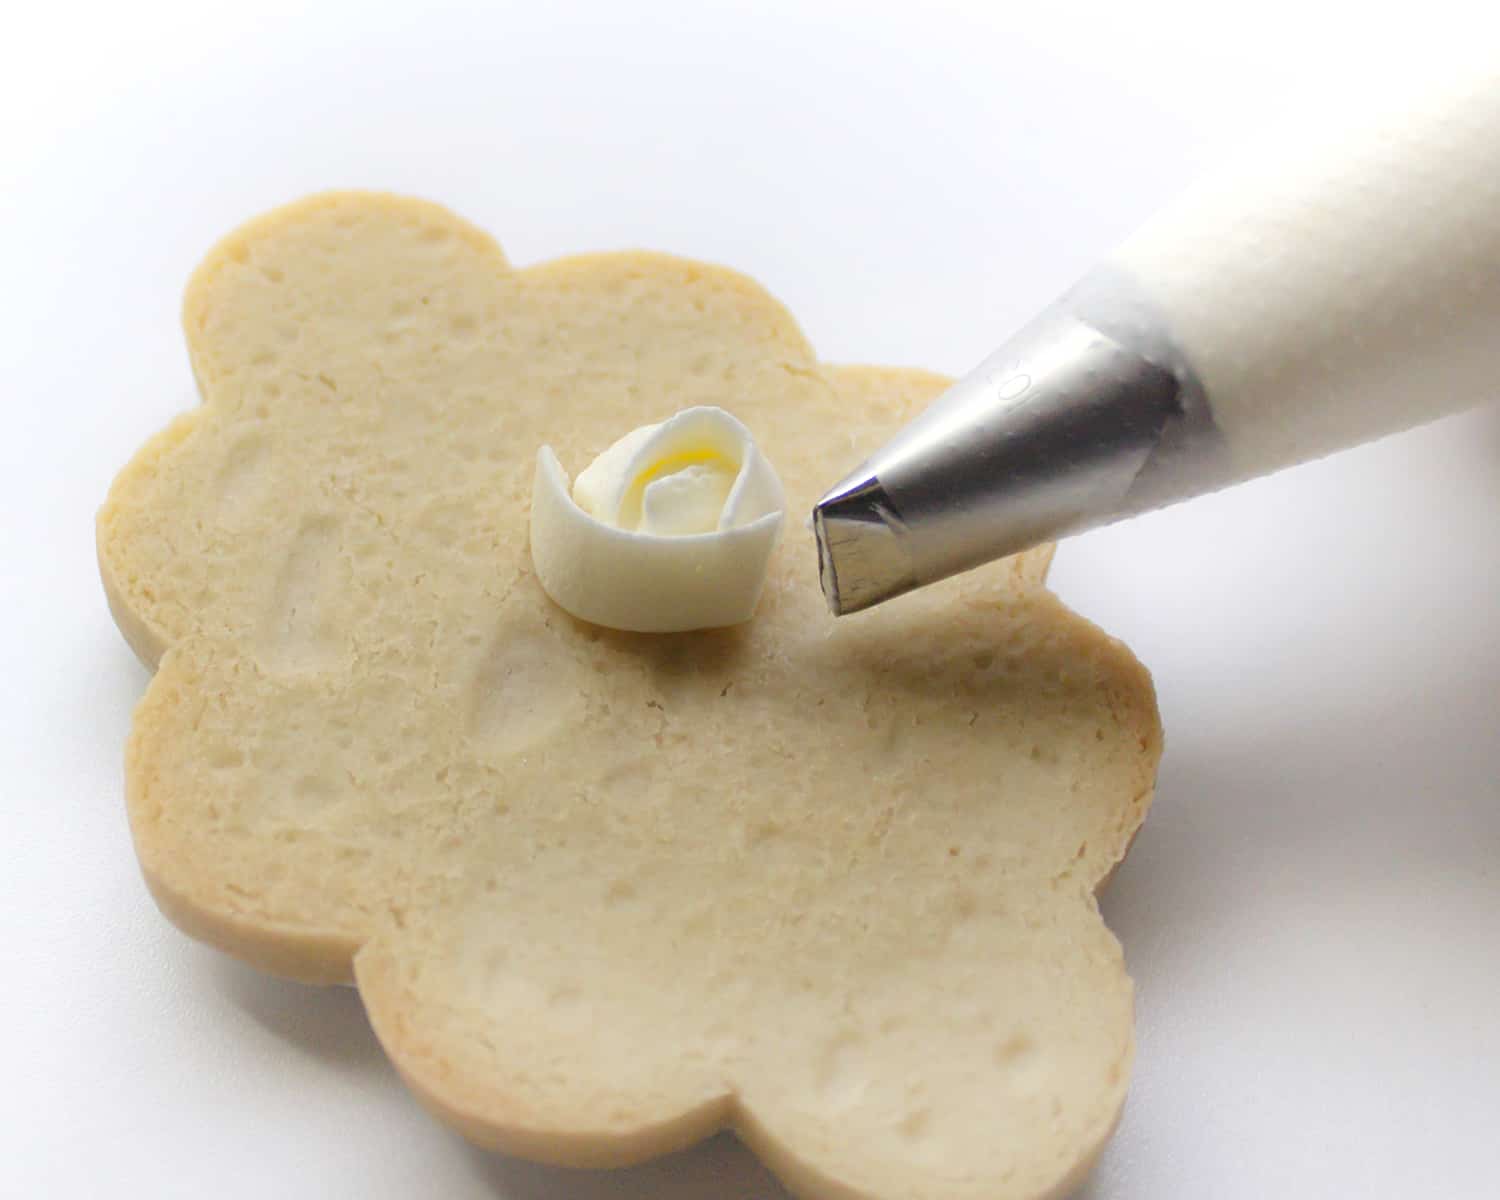 Make a flower shape on the cookie